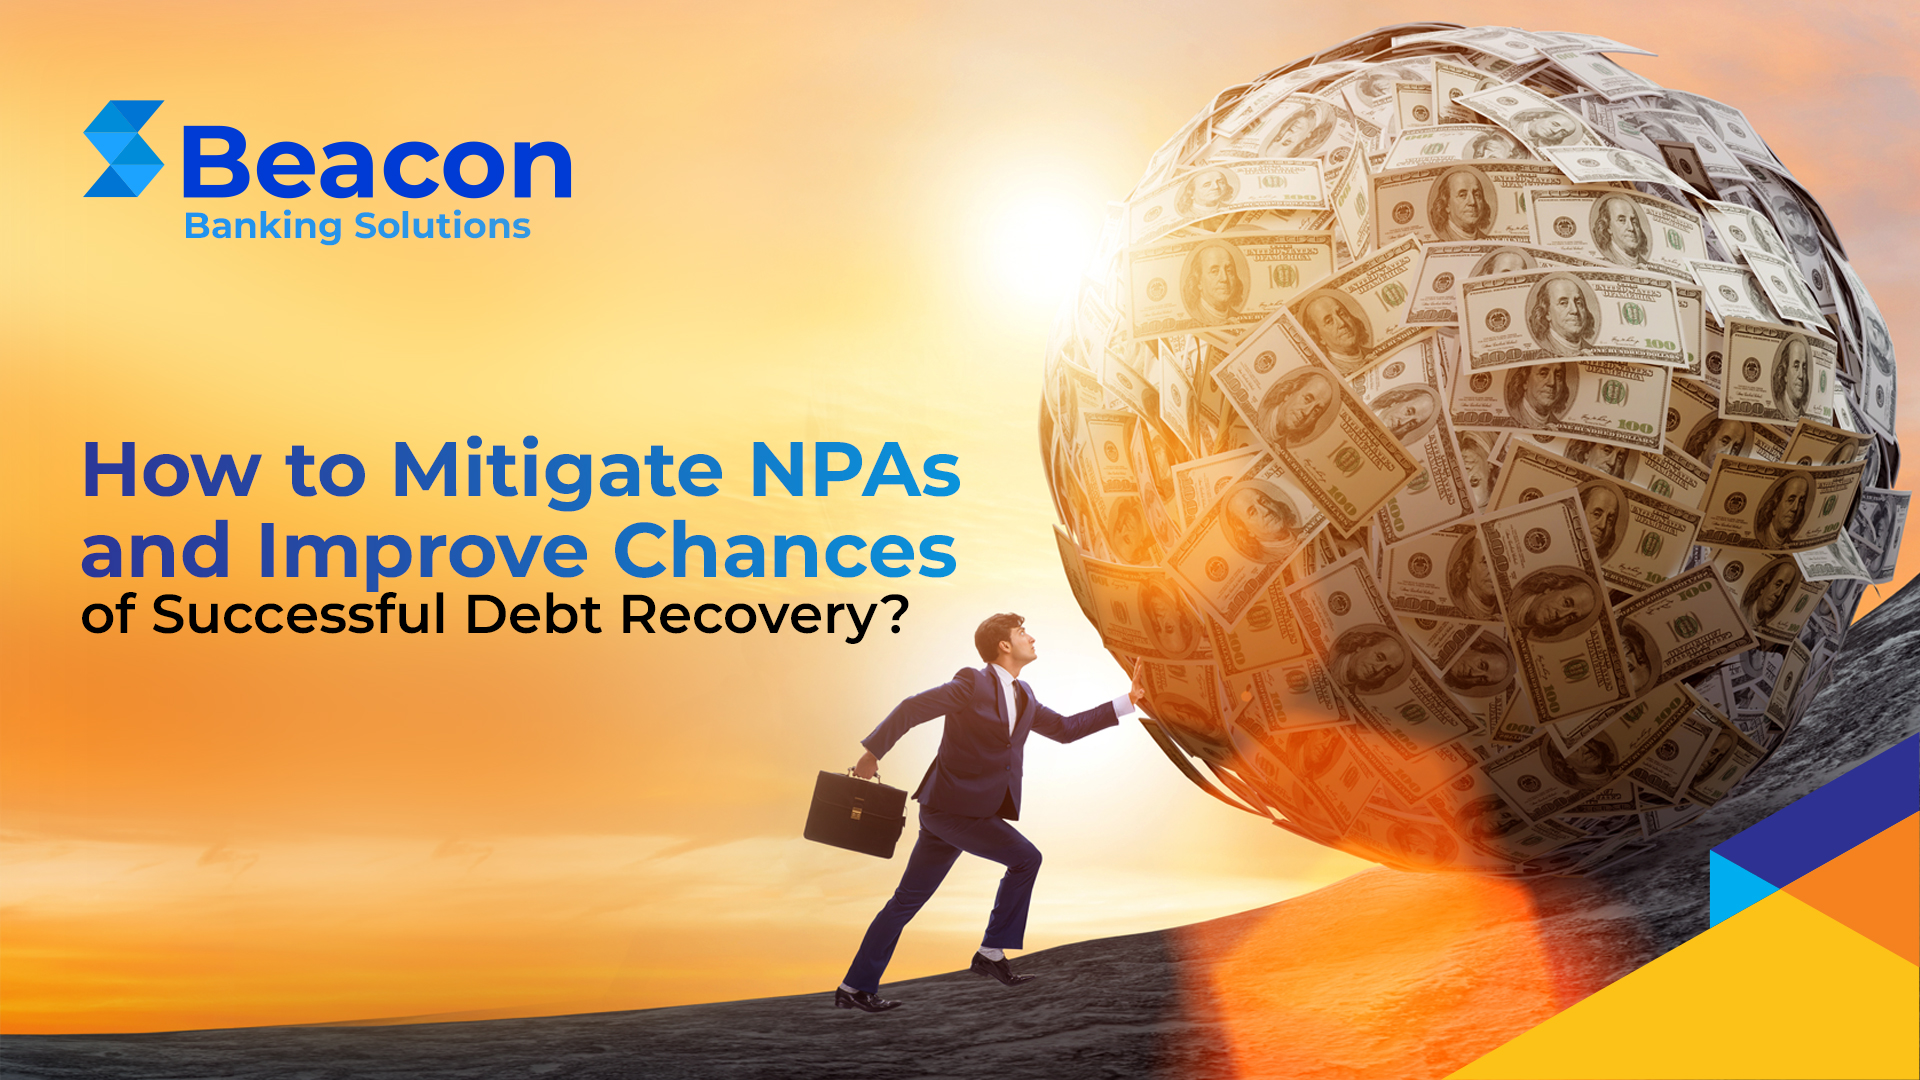 How to Mitigate NPAs and Improve Chances of Successful Debt Recovery?